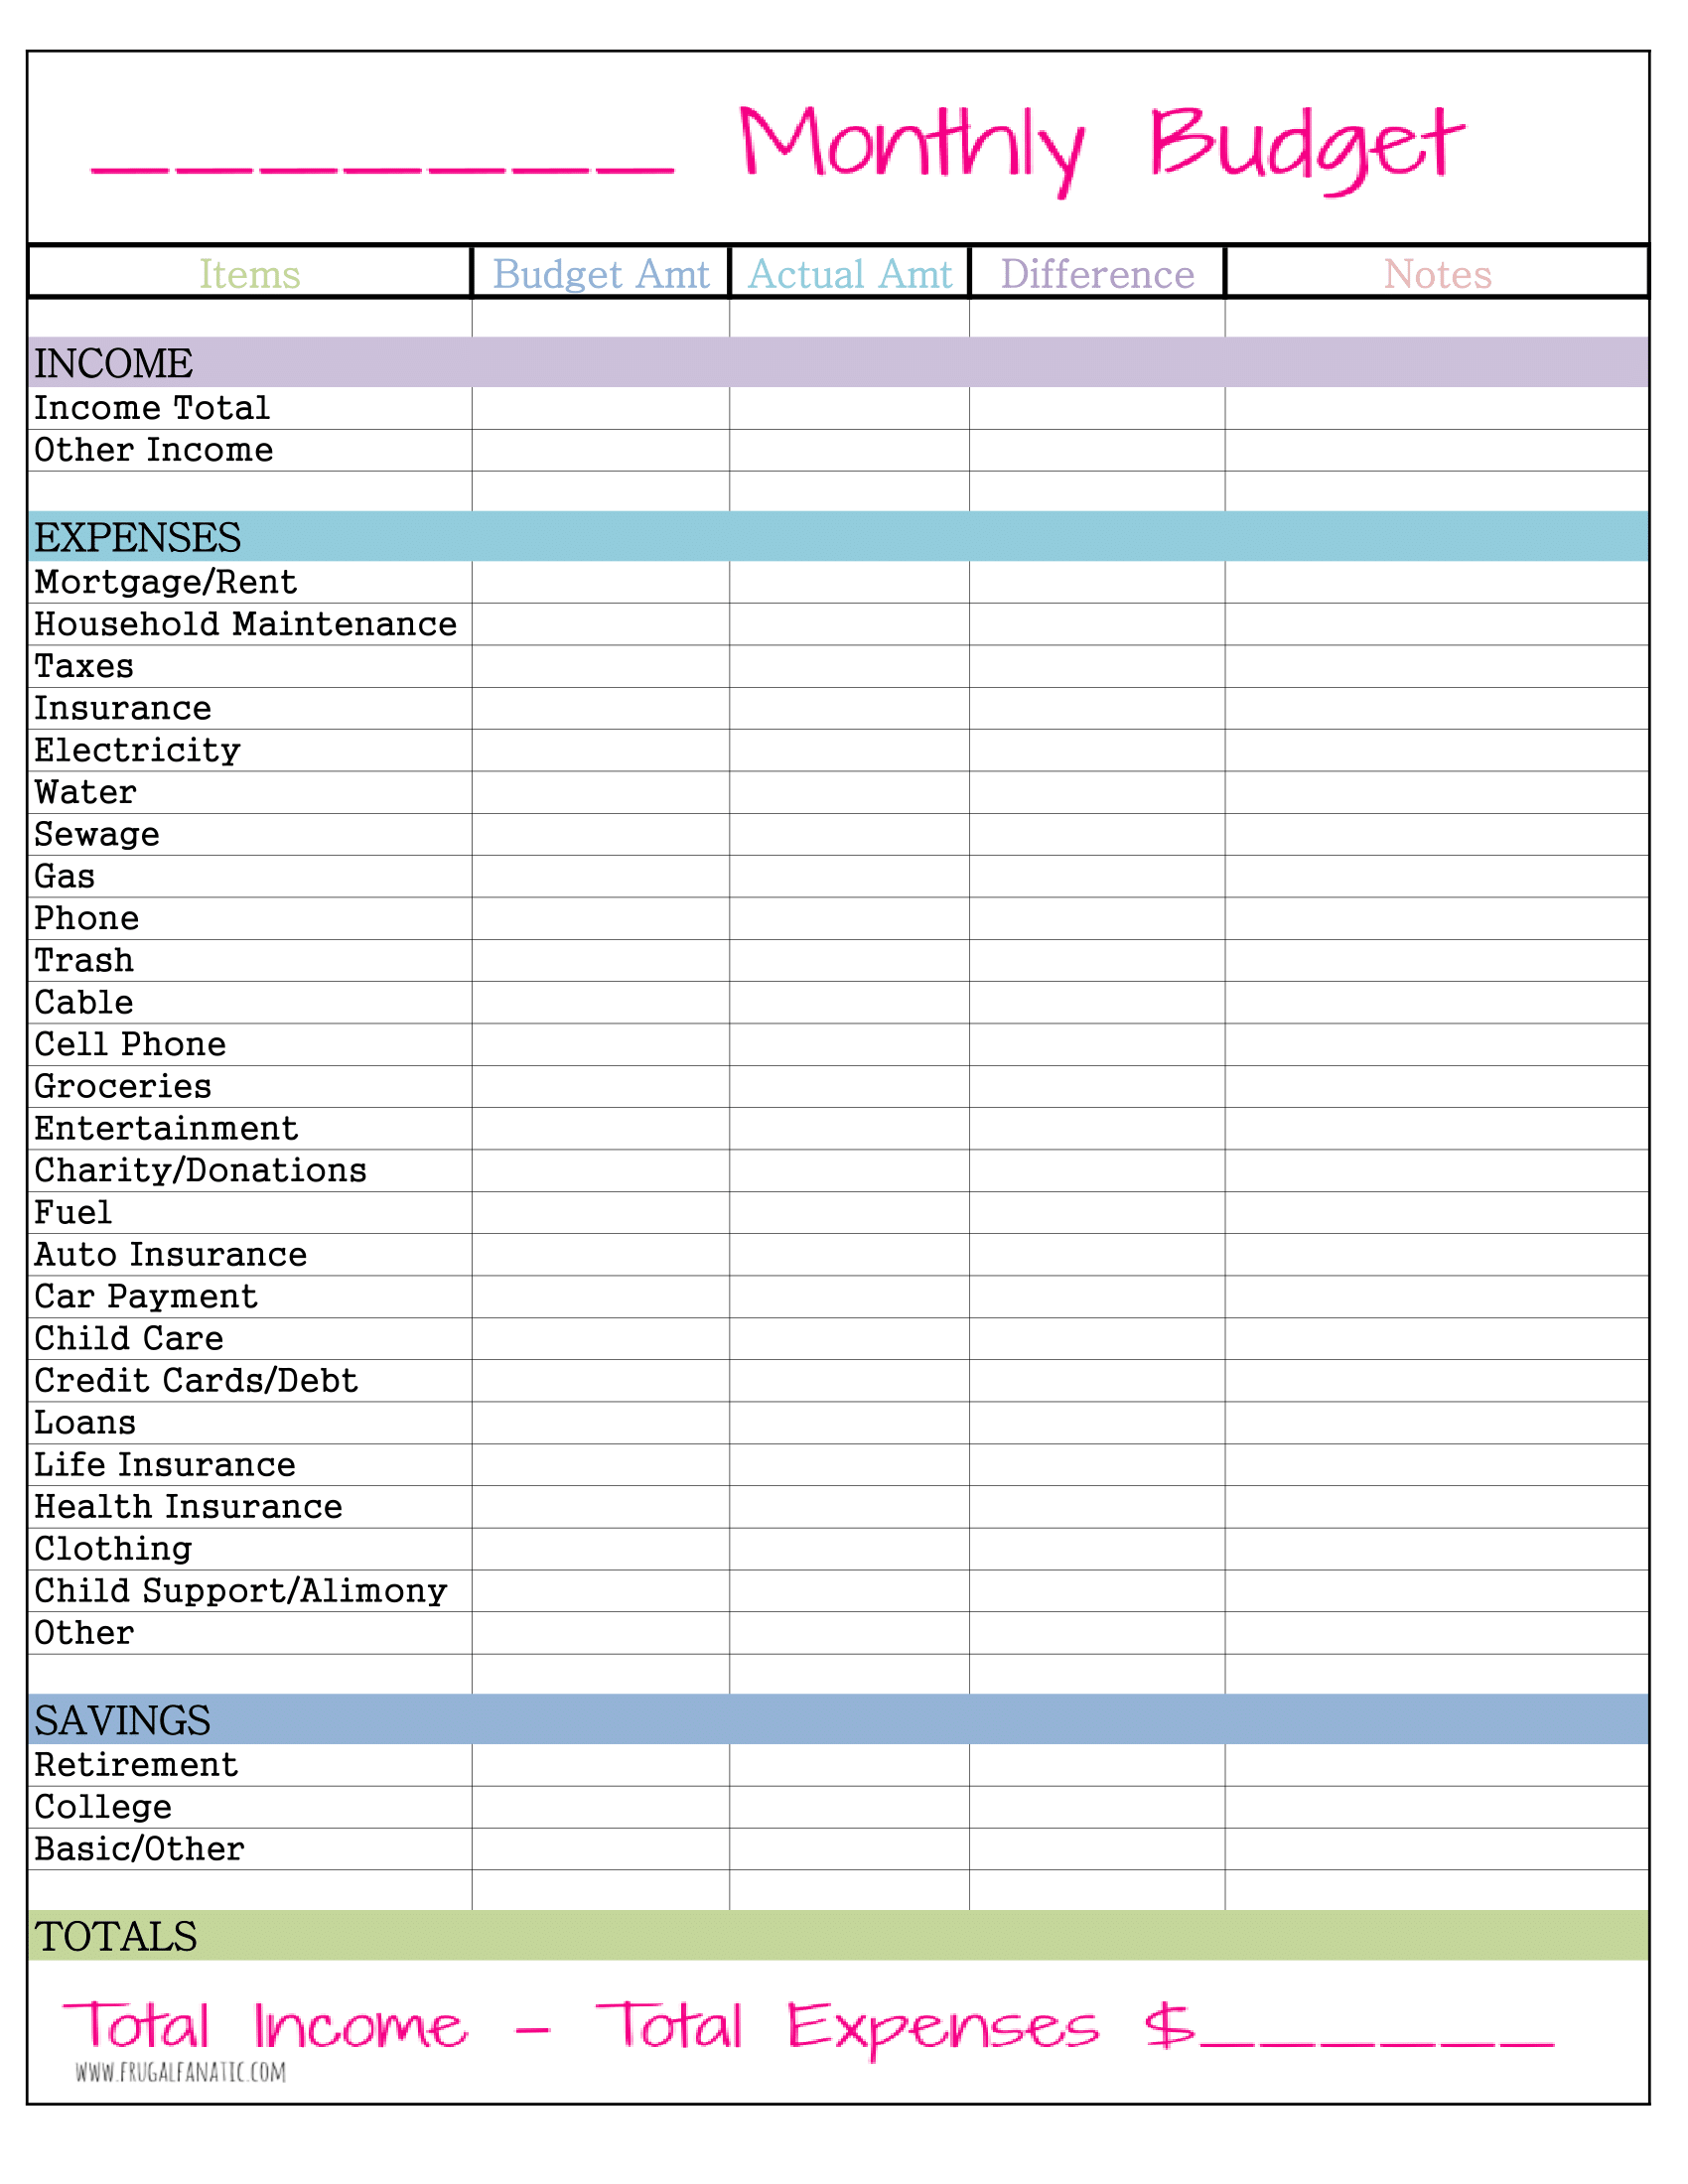 Sample Monthly Budget Template Images And Photos Finder